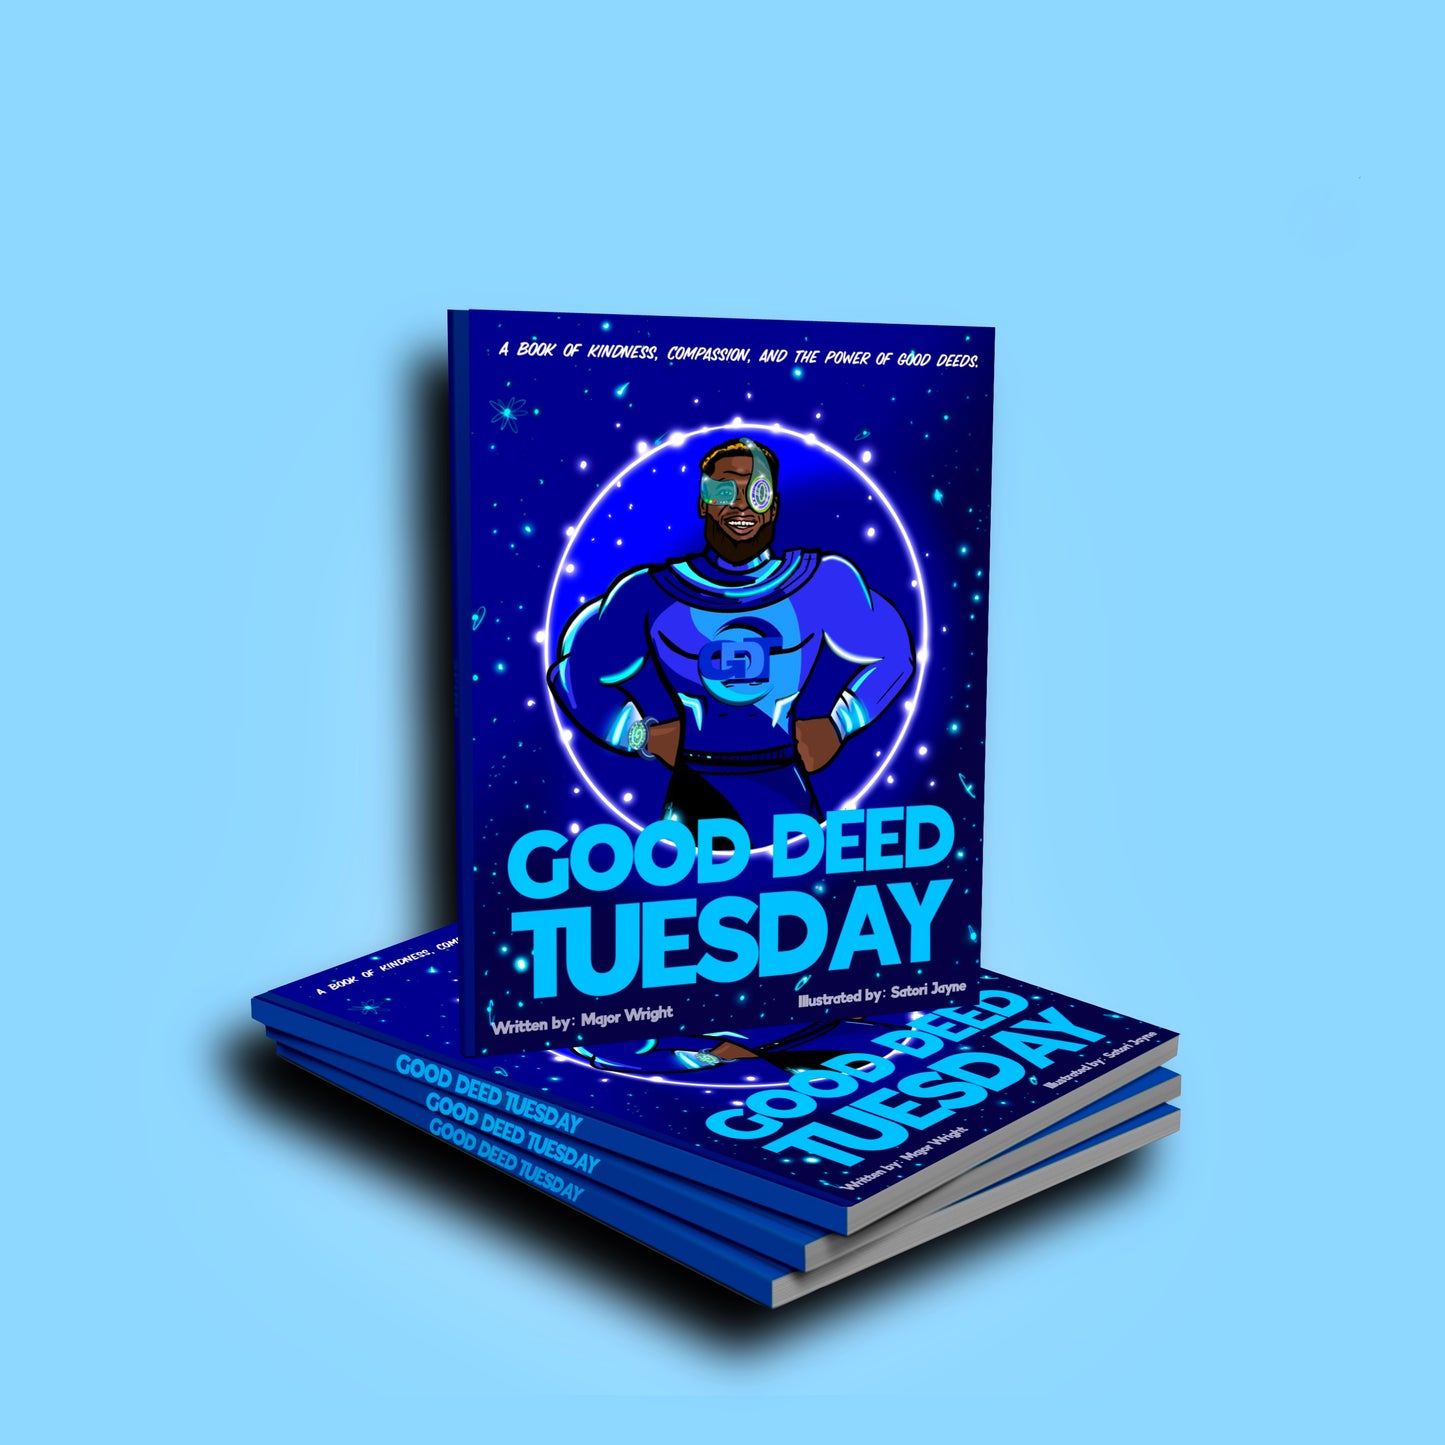 GOOD DEED TUESDAY Soft-Cover ORDER